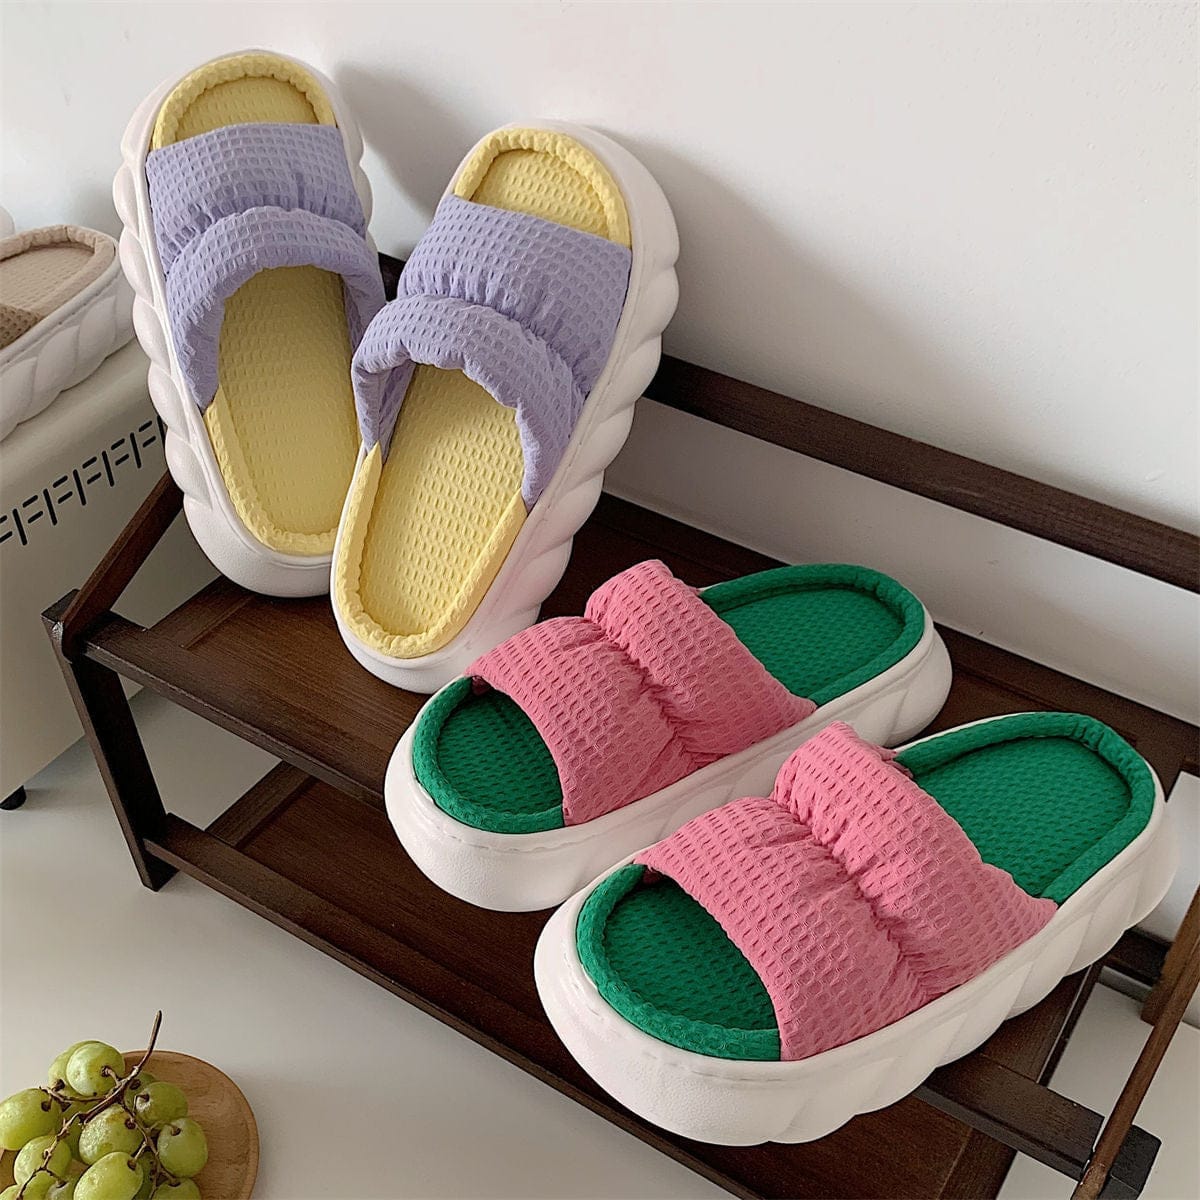 Candy Colored Cotton And Hemp Slippers For Home Use In Leisure Room BENNYS 